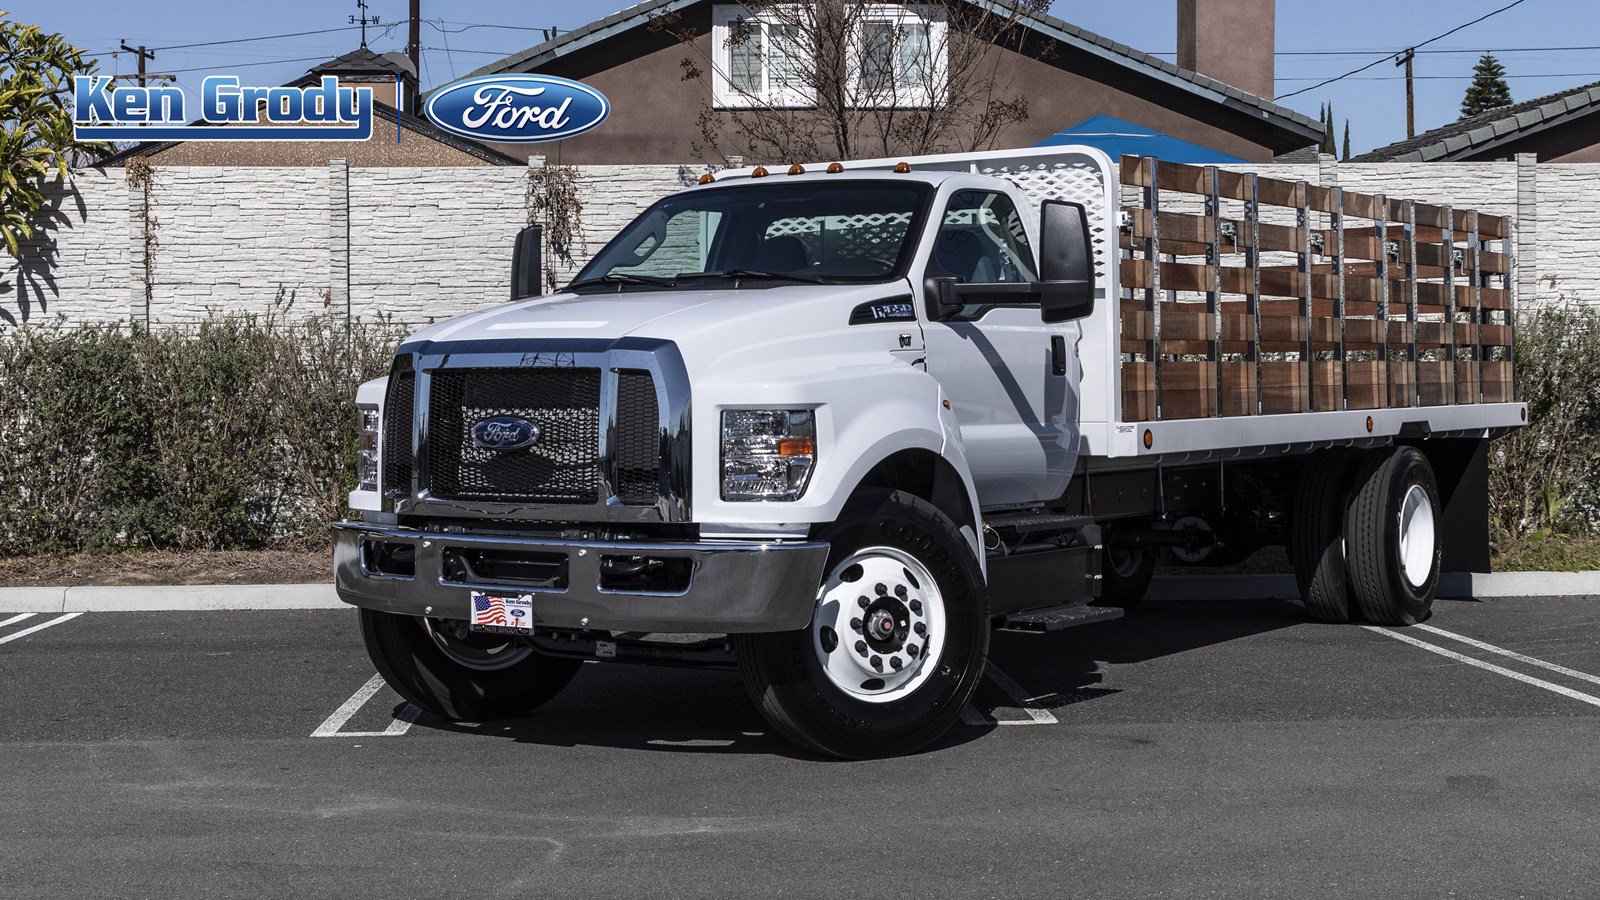 New 2019 Ford F650 Hgt With 20 Stakebed Regular Cab Dock In Redlands